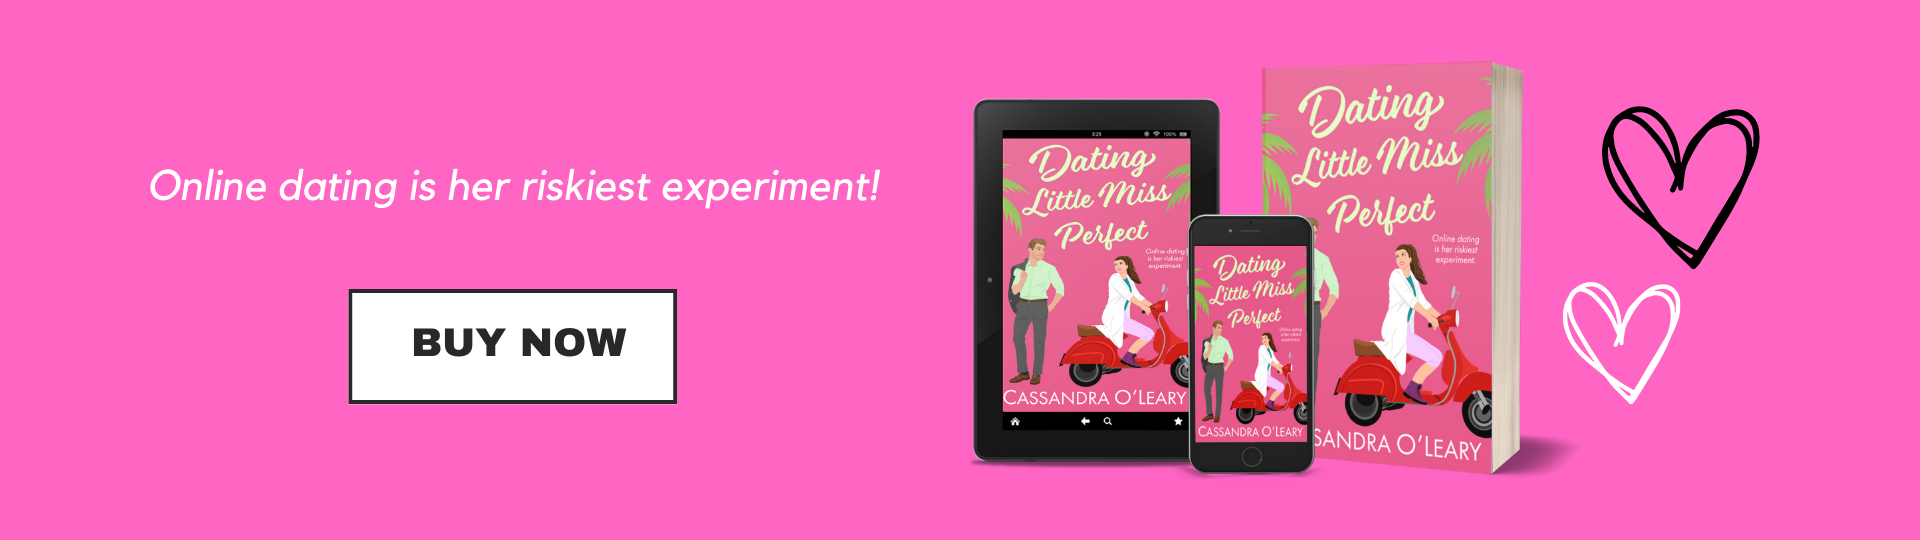 Dating Little Miss Perfect promo banner